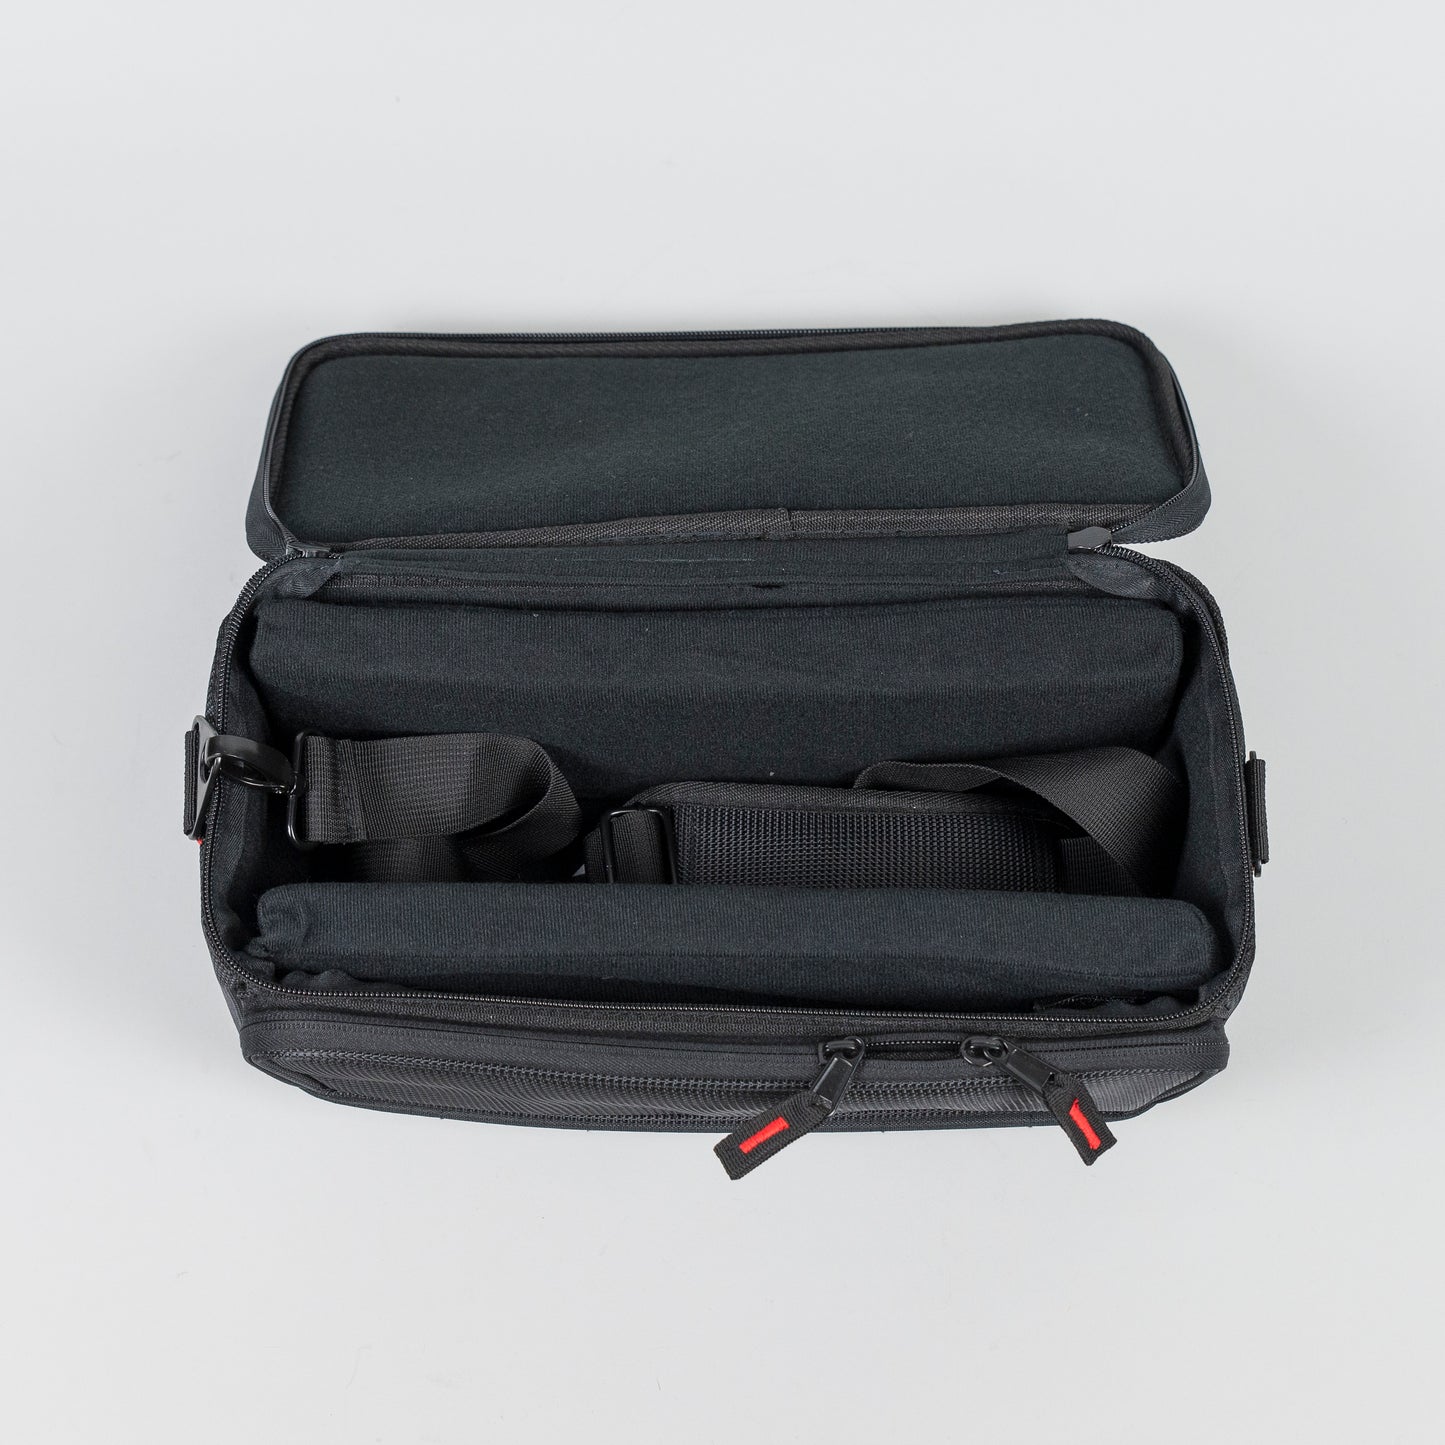 Gator Padded Carry Bag For Midas MR12, MR18, And Behringer X Air Series Mixers